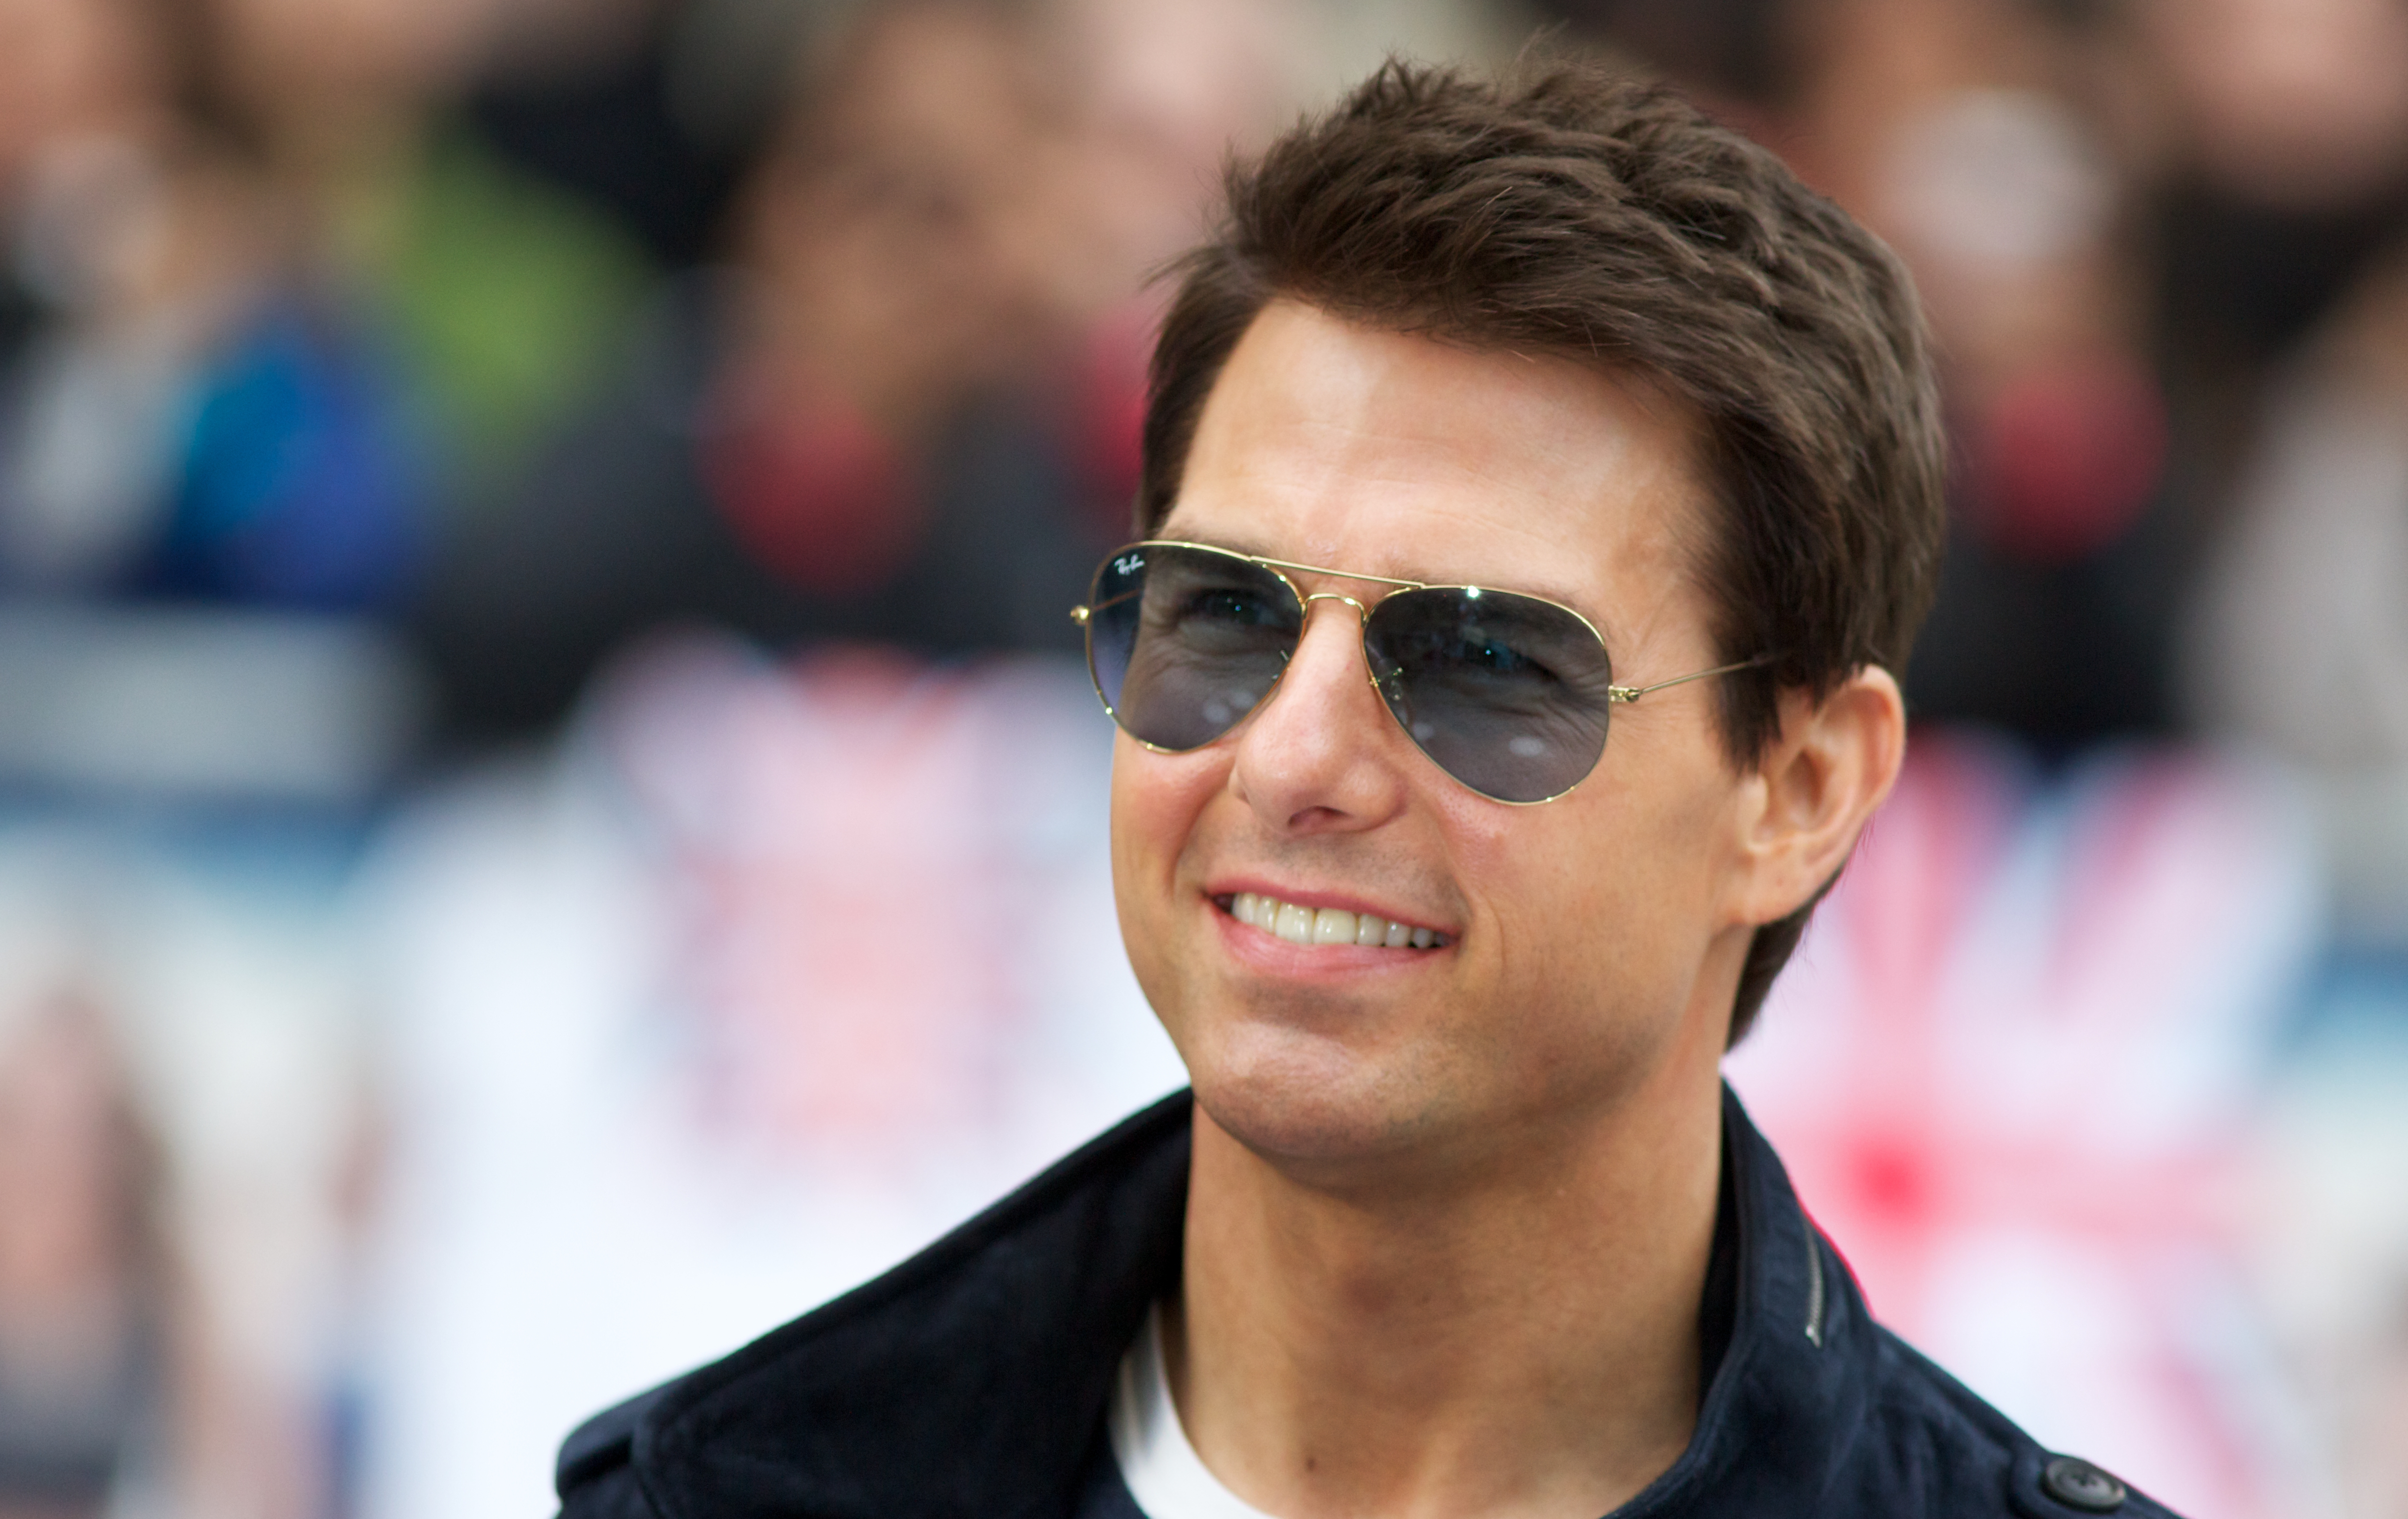 Tom Cruise Wallpapers Images Photos Pictures Backgrounds